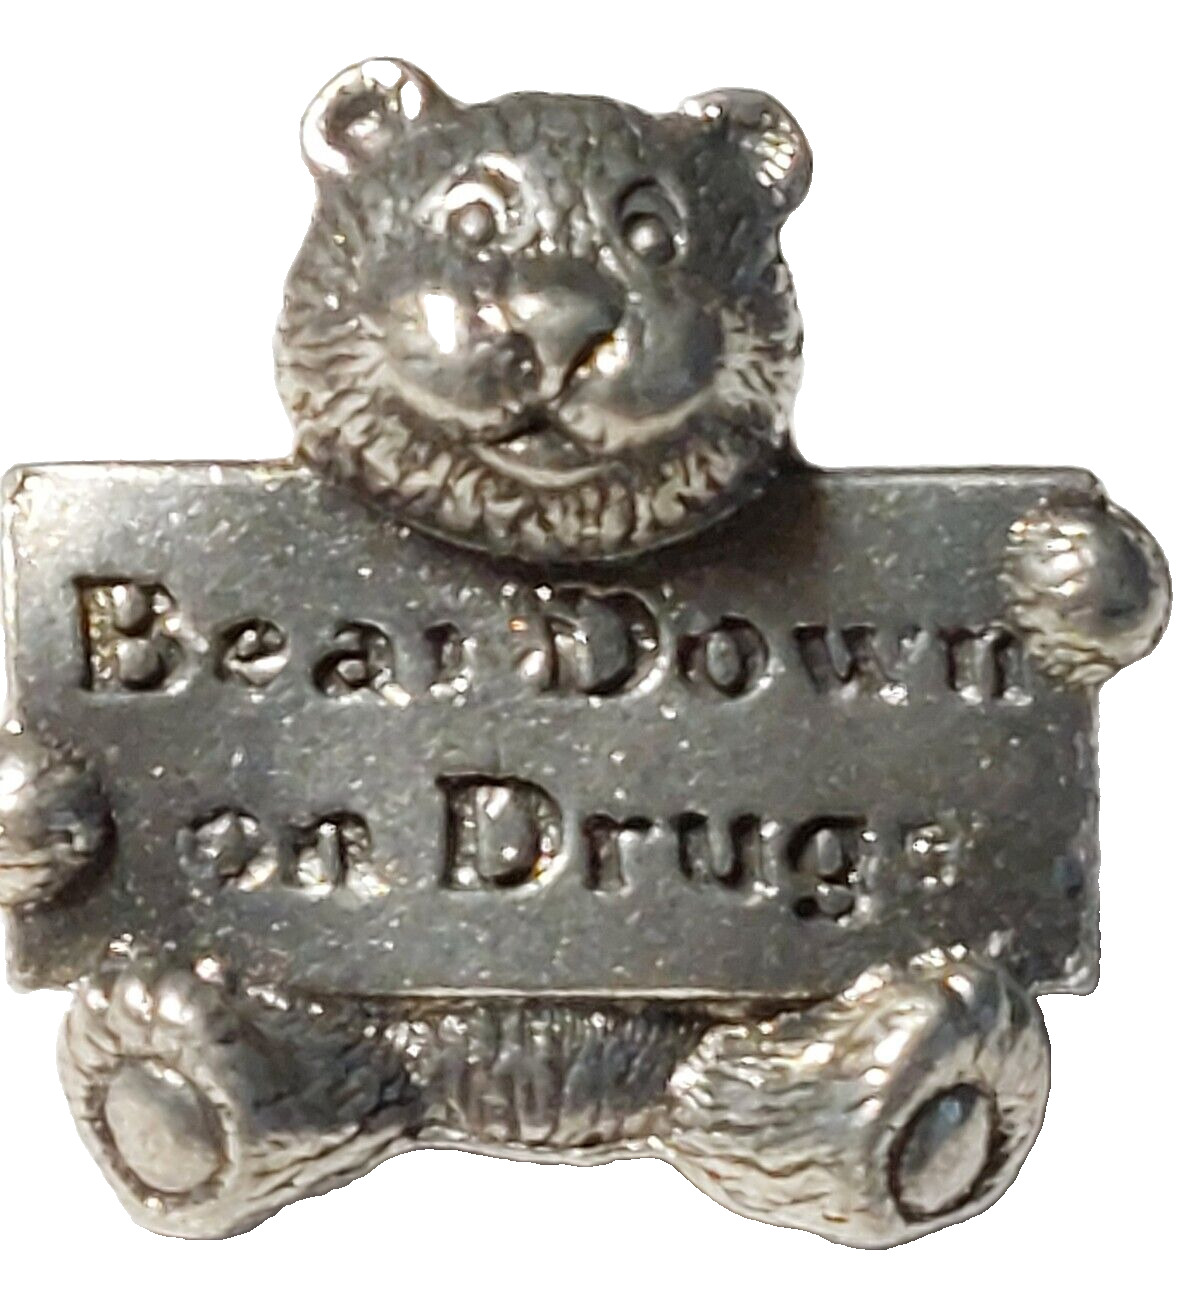 Bear Down on Drugs Silver Toned Lapel Pin